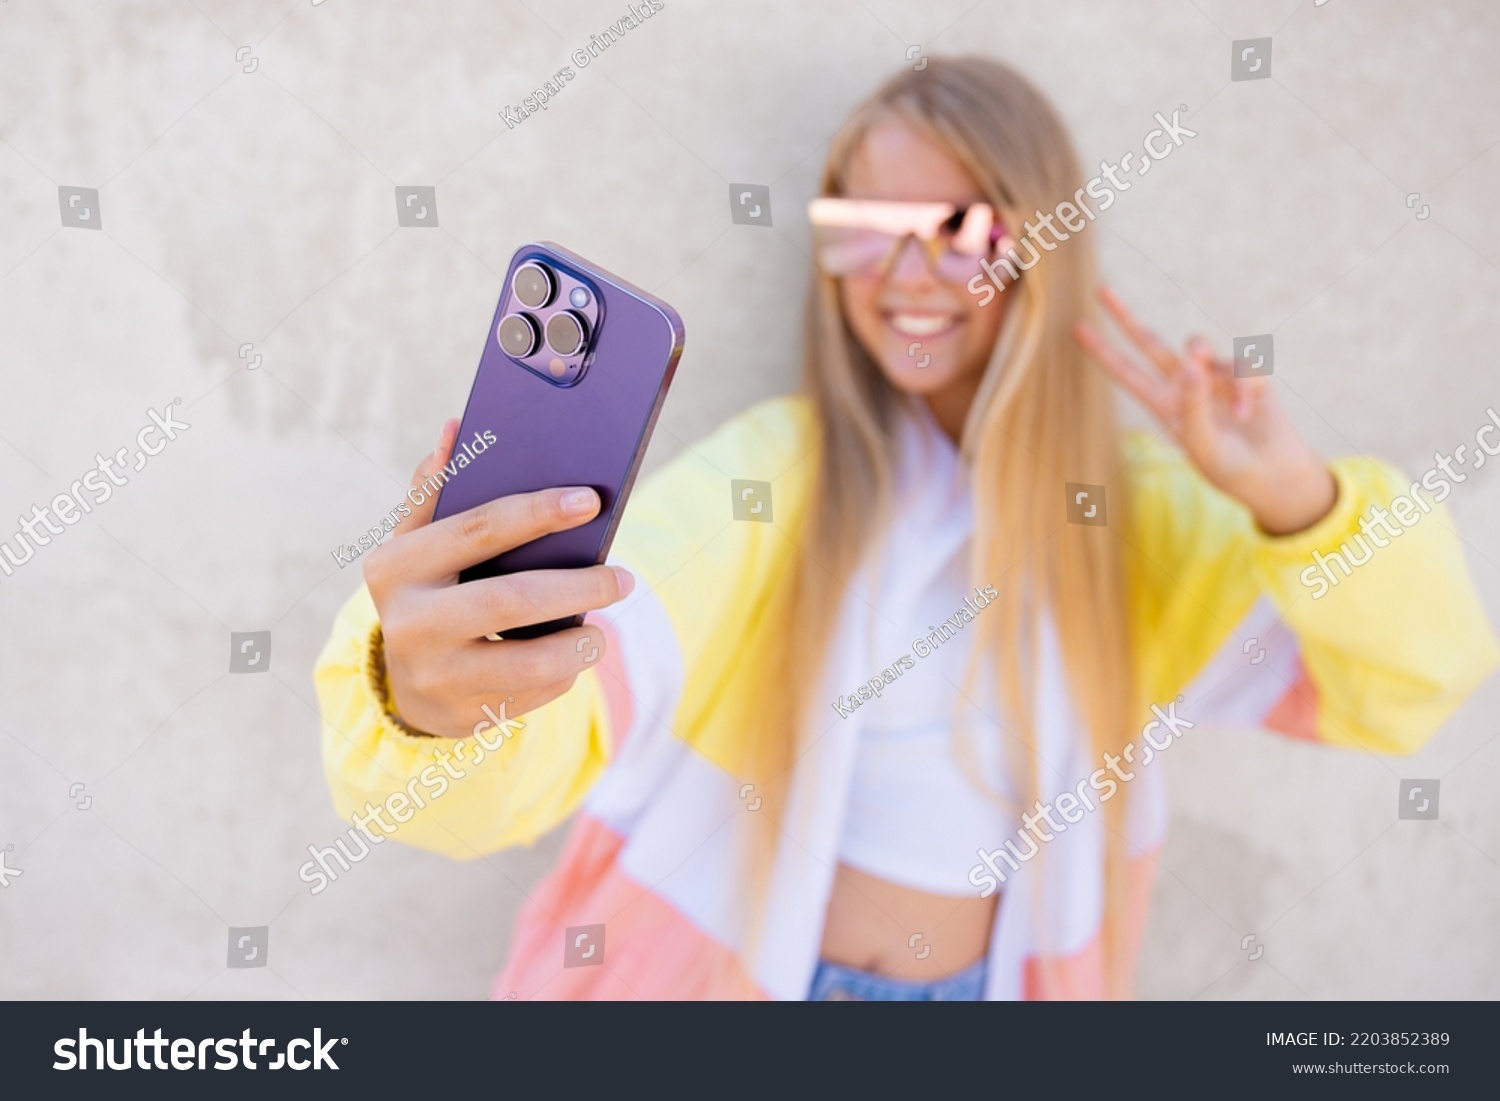 Girl taking selfie with mobile phone #2203852389